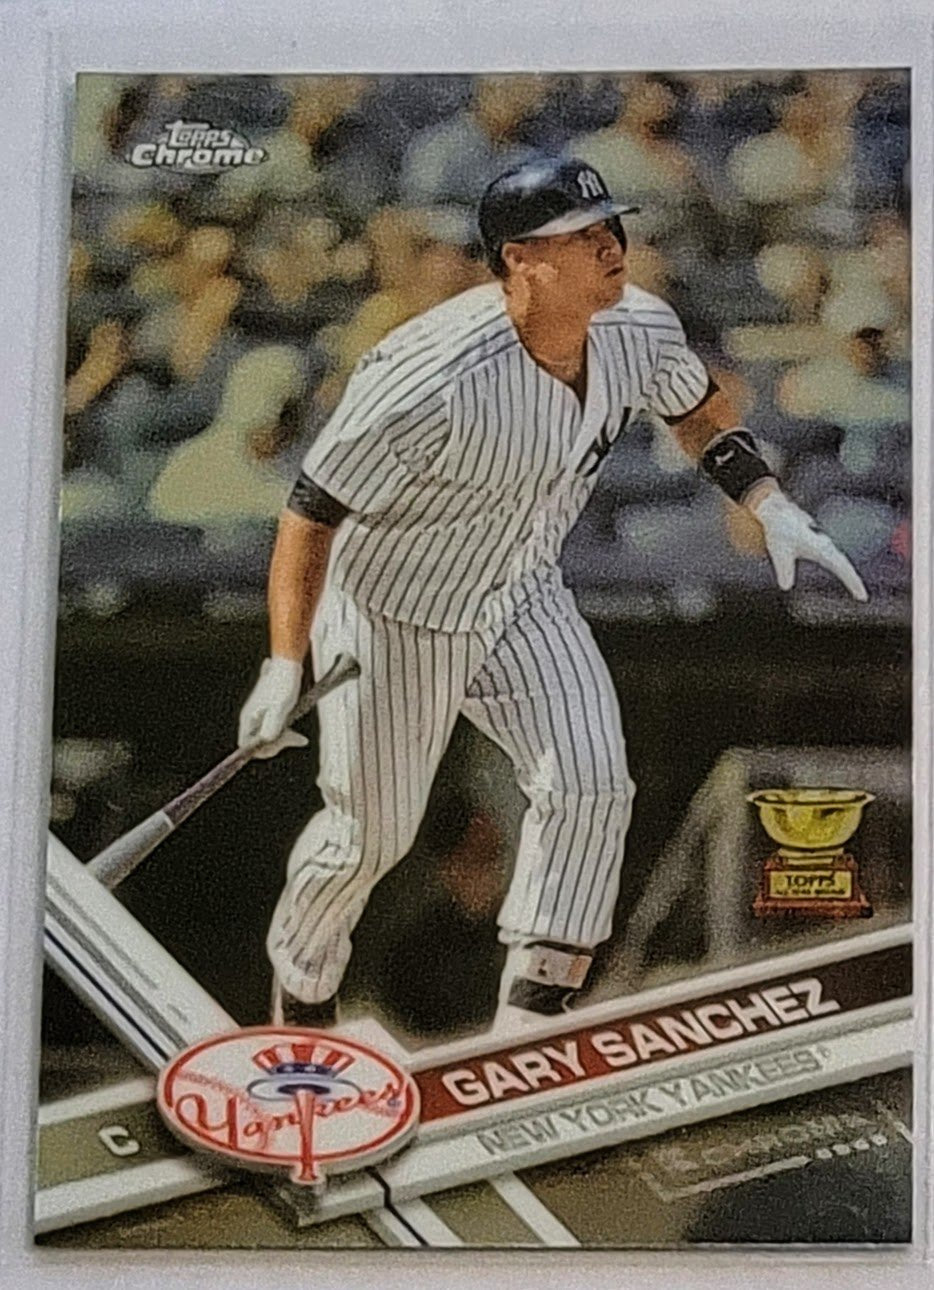 2017 Topps Chrome Gary Sanchez All Star Rookie Cup Baseball Card TPTV simple Xclusive Collectibles   